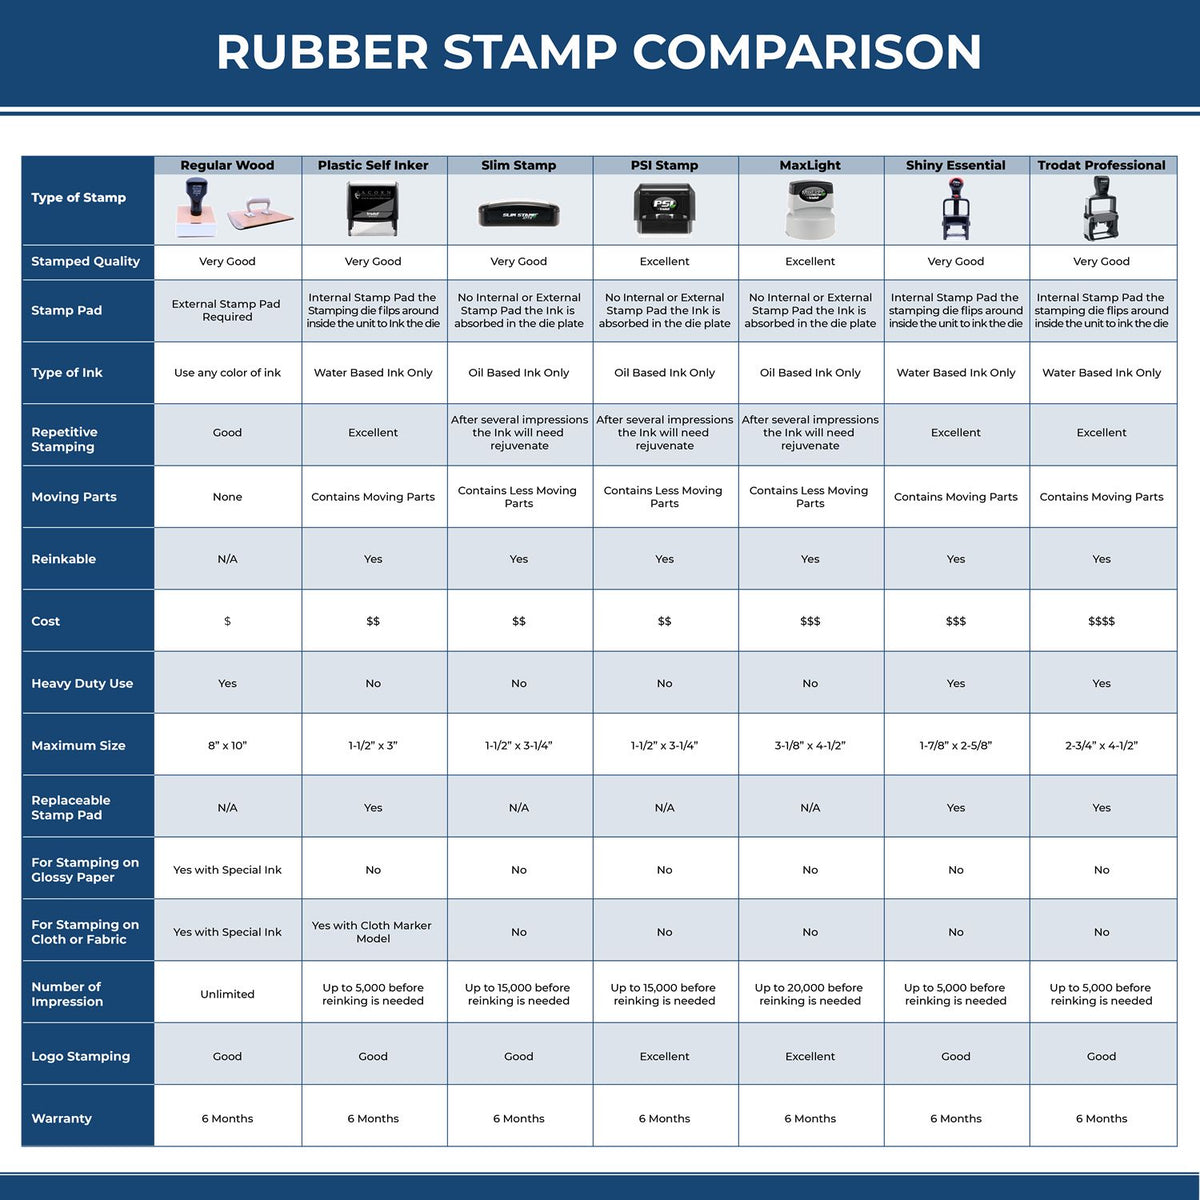 Large Self Inking Aetna Stamp 4532S Rubber Stamp Comparison